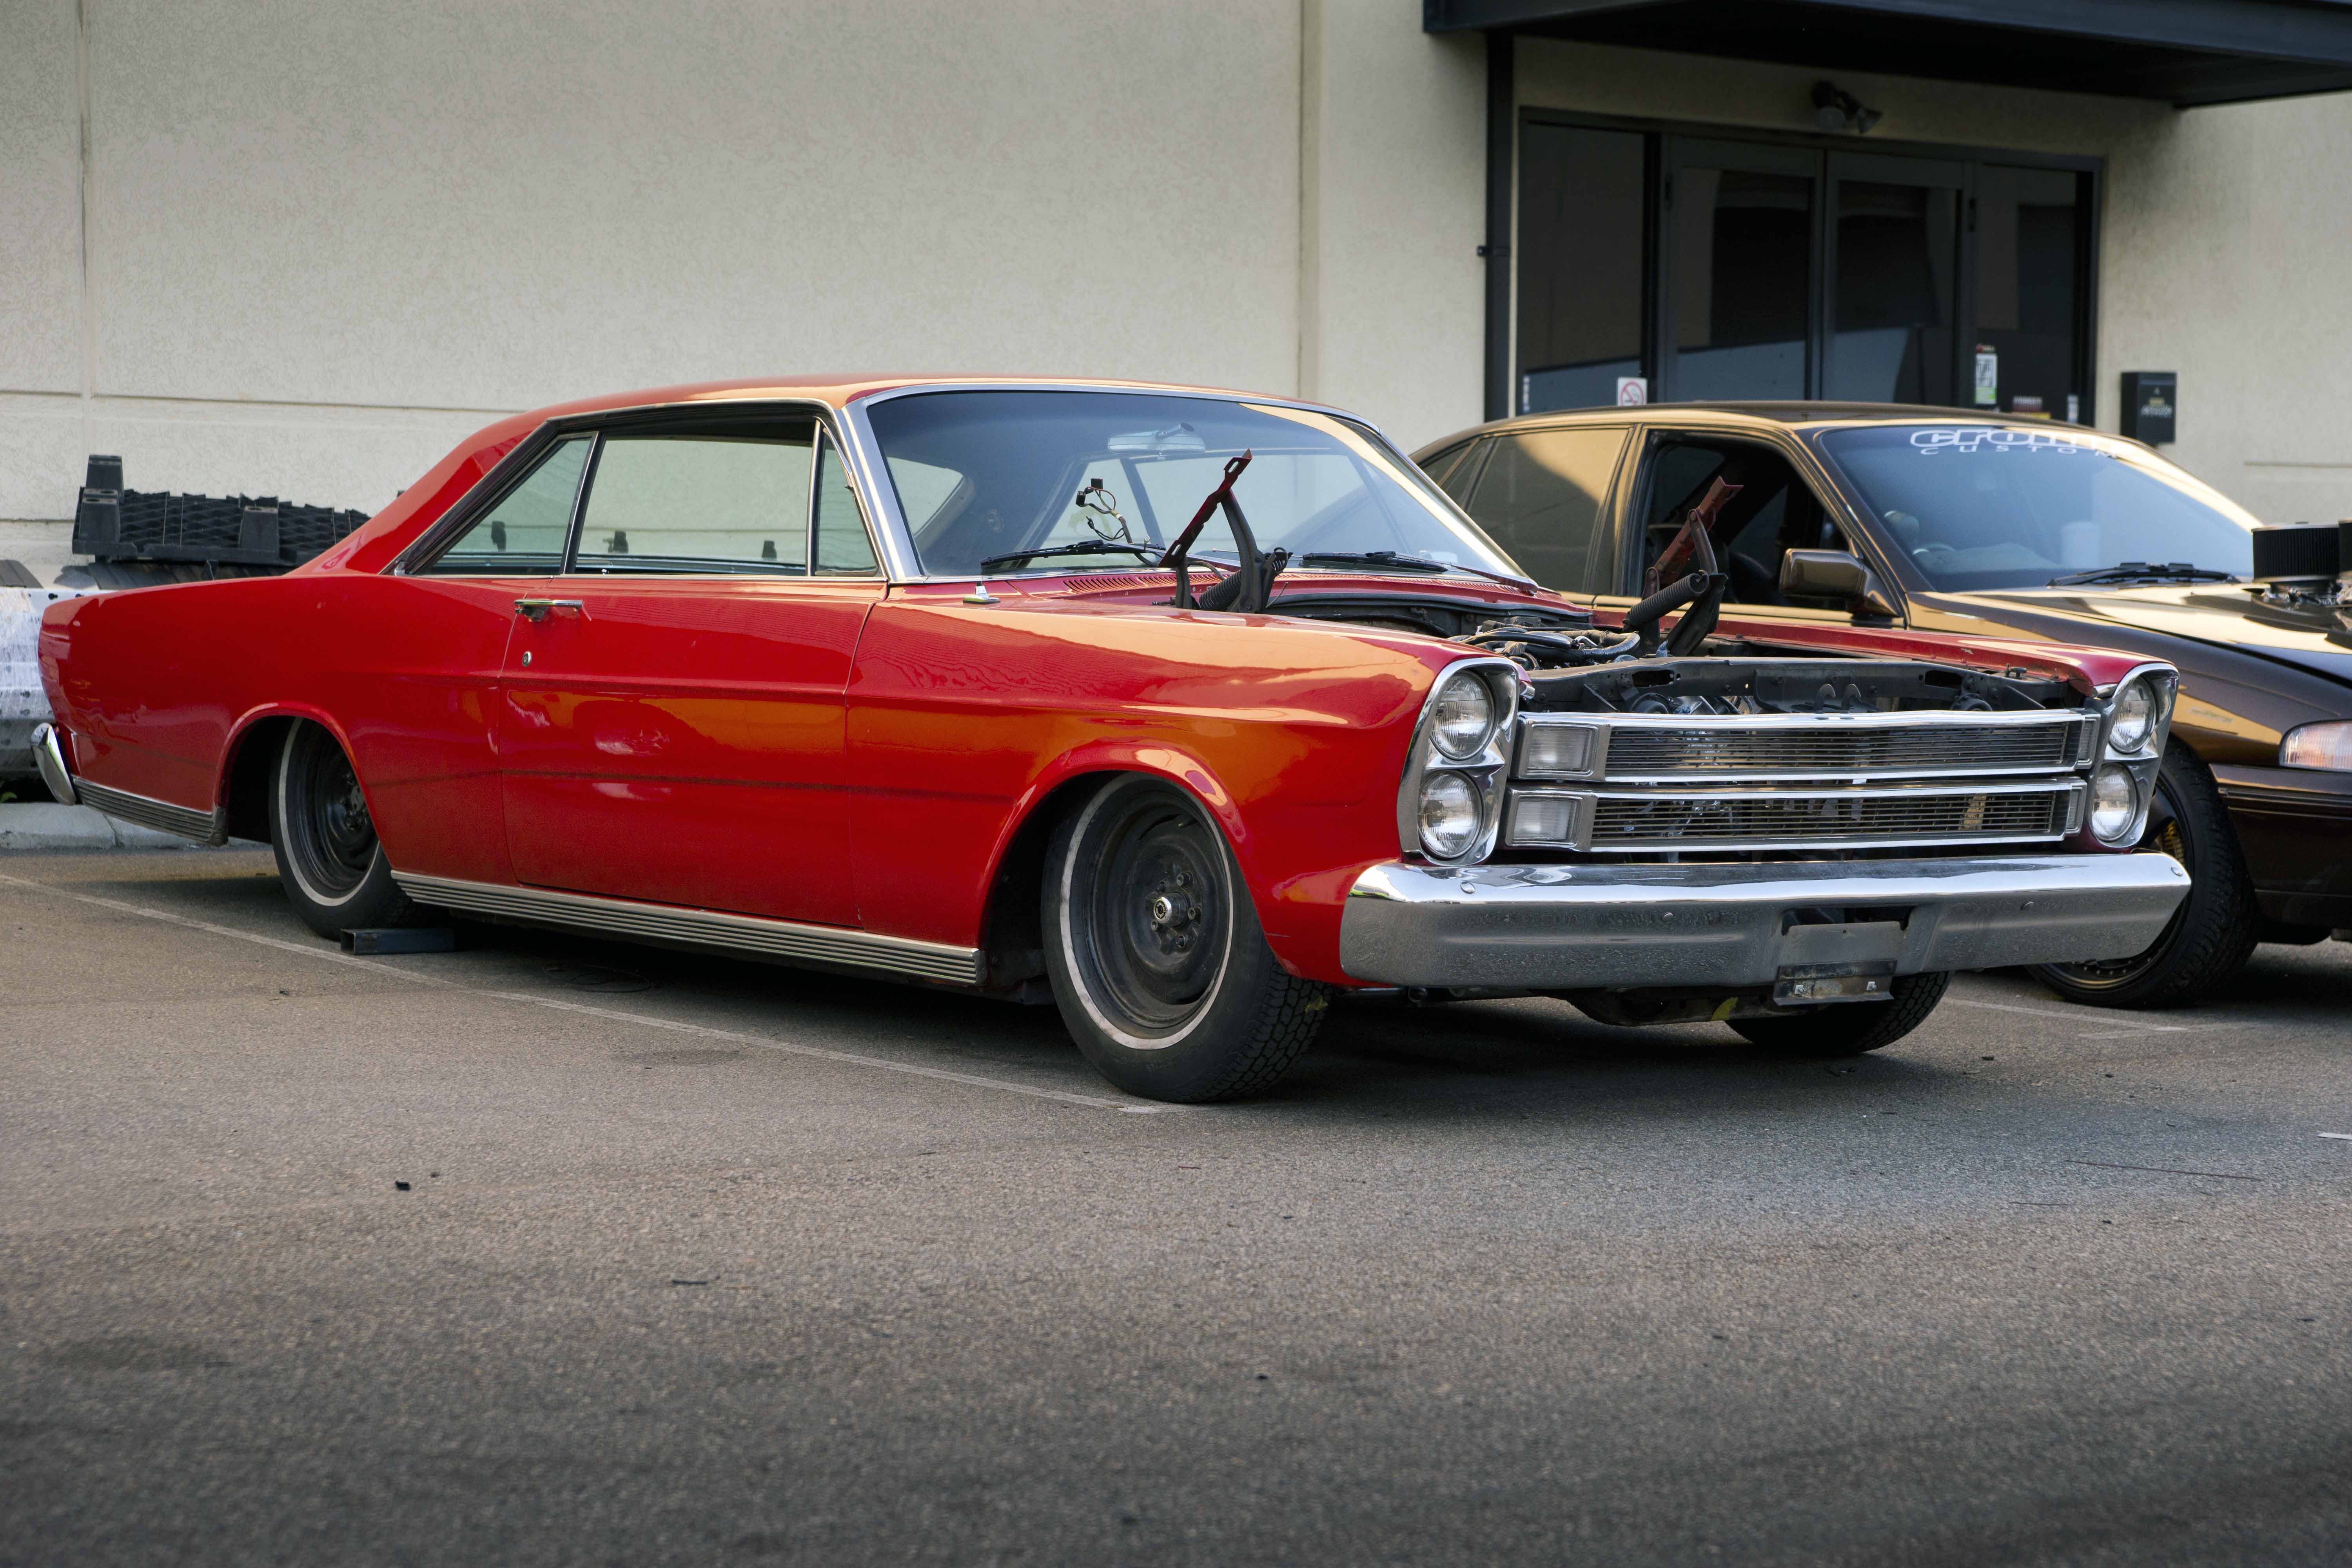 IN THE BUILD – 1966 Ford Galaxie